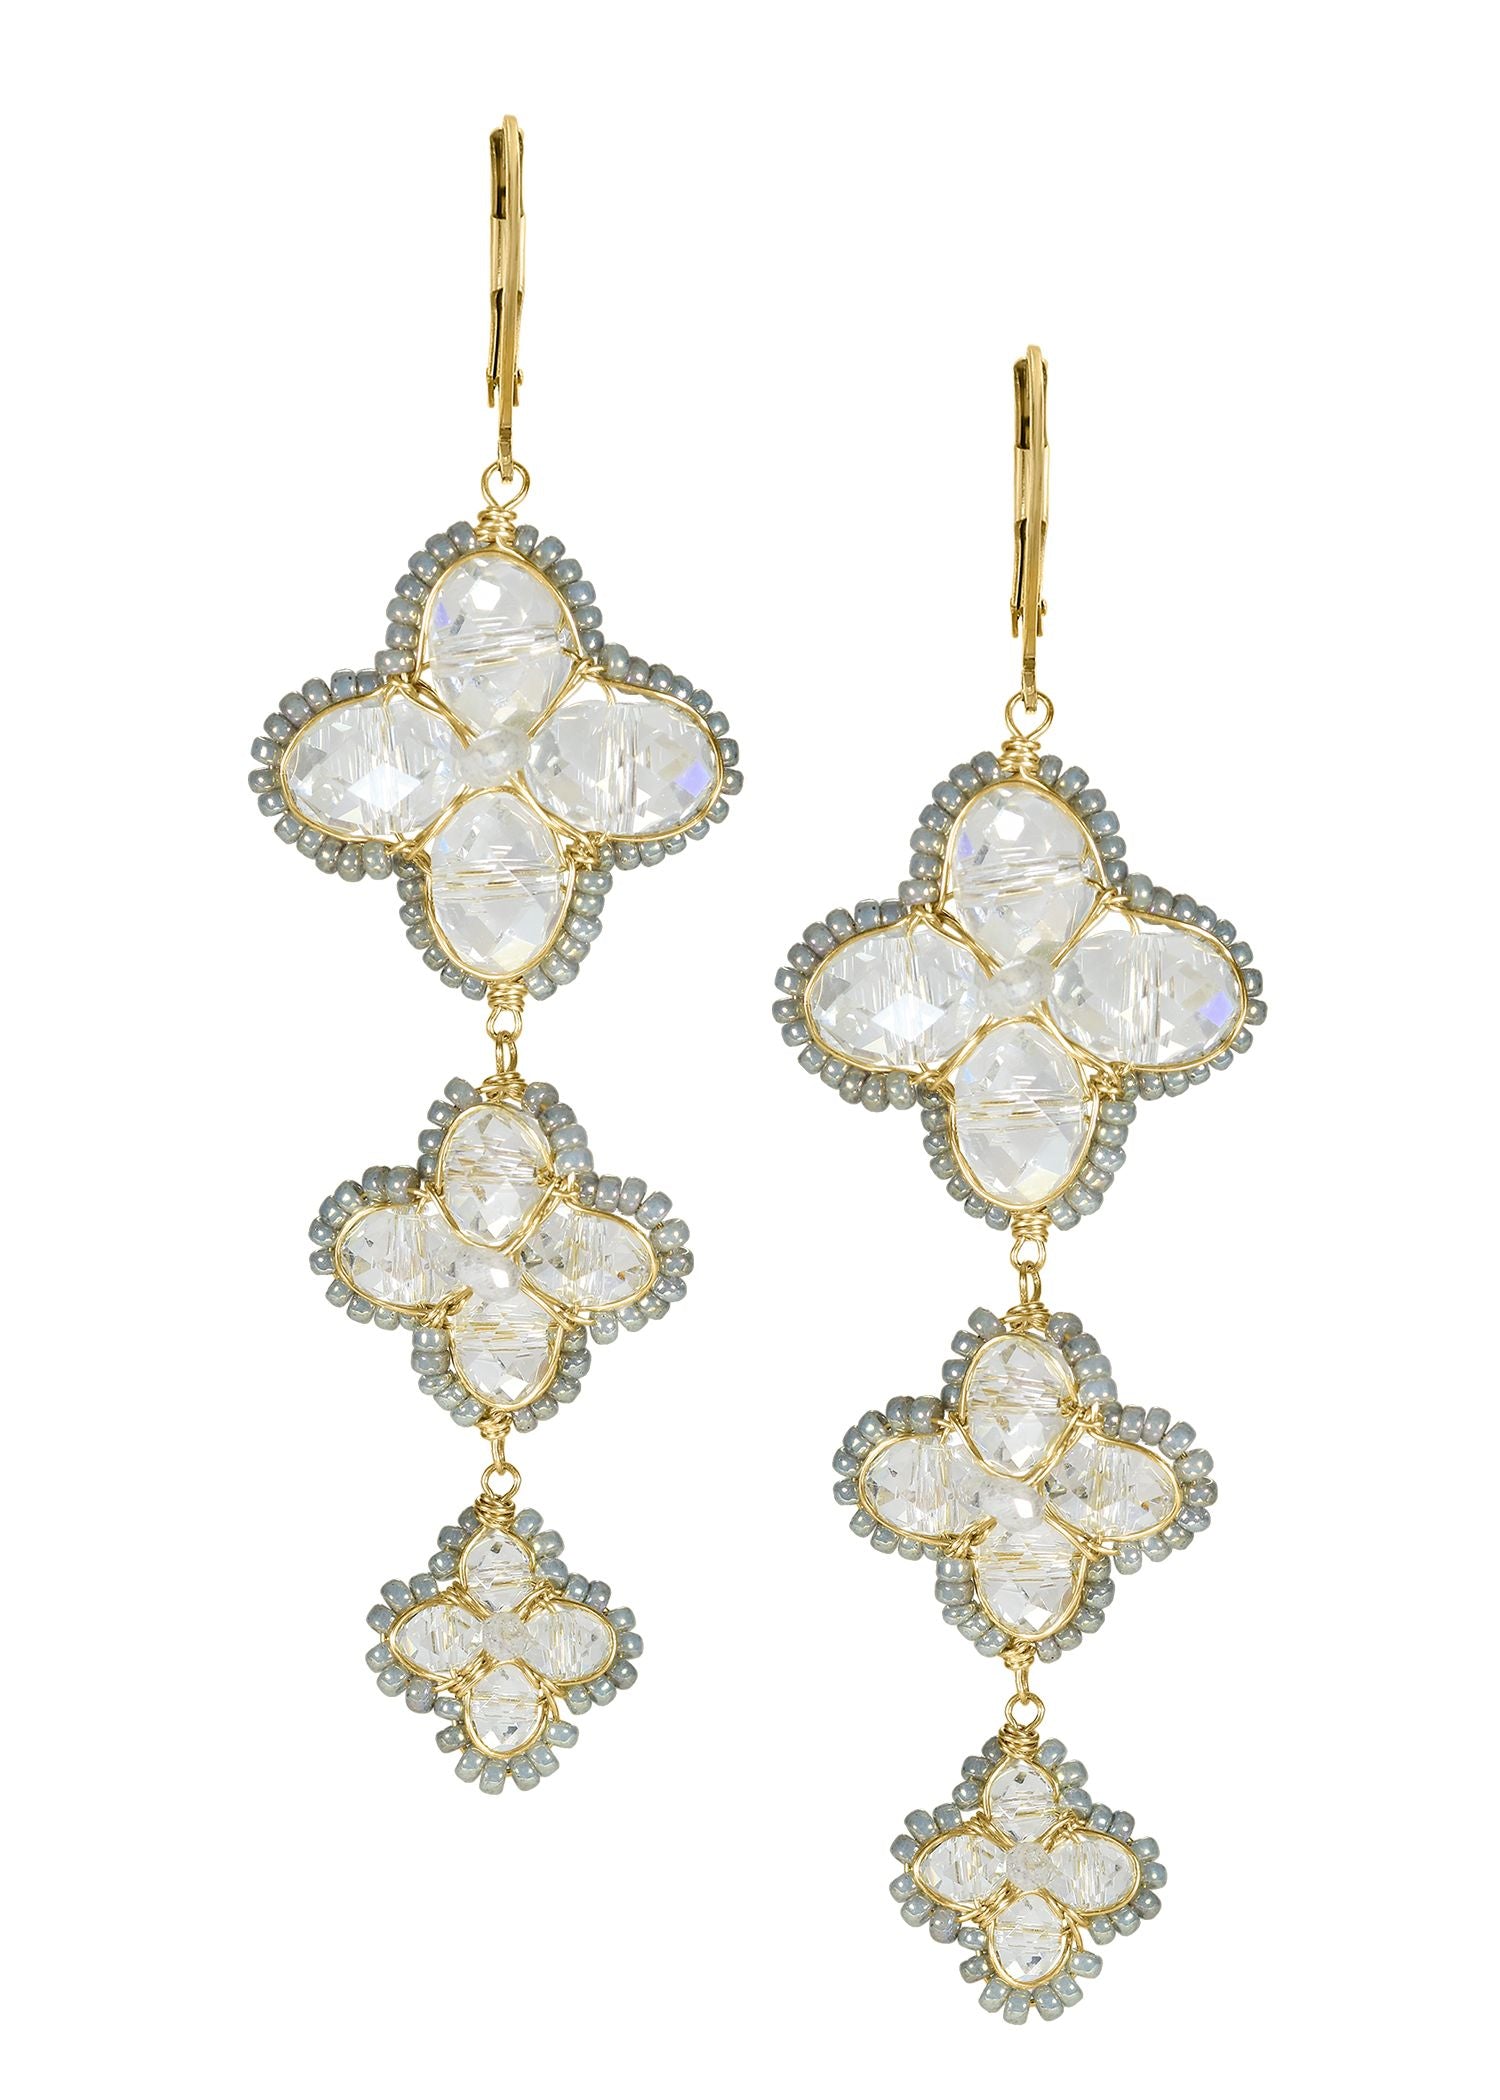 Crystal Moonstone Pearl seed beads 14k gold fill Earrings measure 2-3/4" in length (including the levers) and 13/16" in width Handmade in our Los Angeles studio